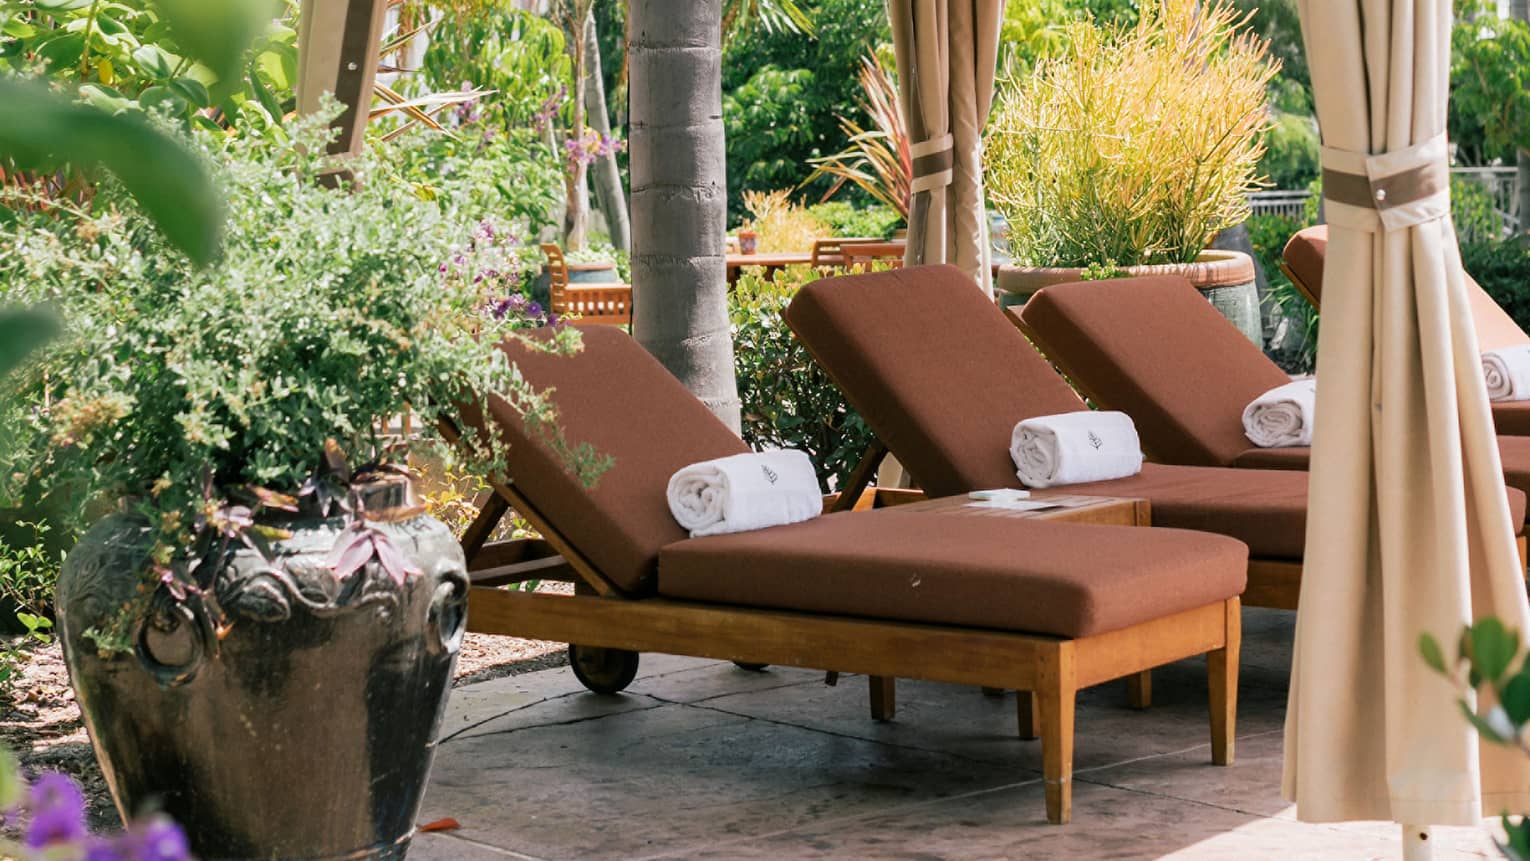 A poolside cabana with brown lounge chairs and plants and flowers surrounding it.